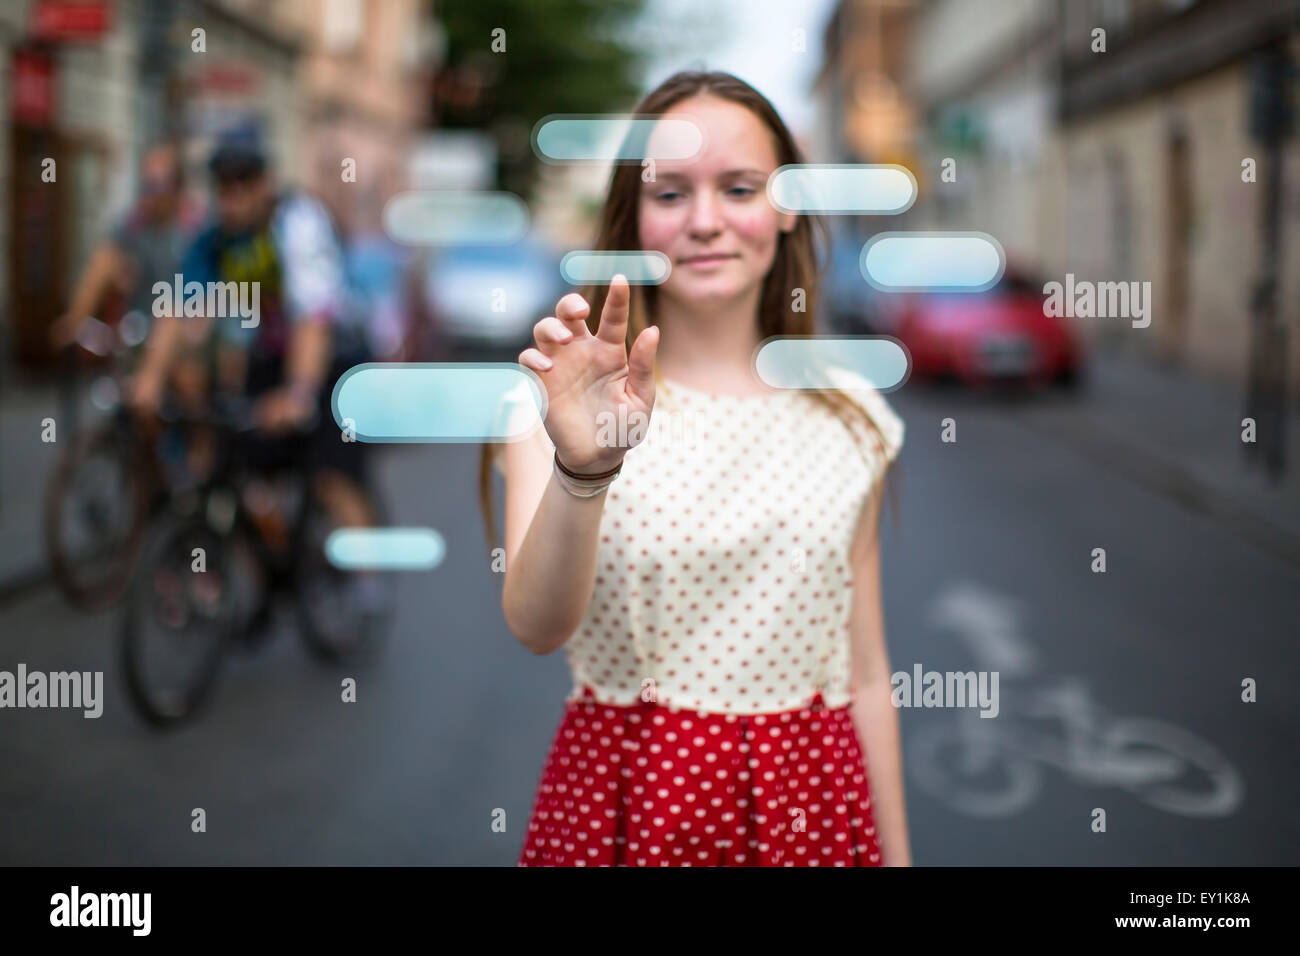 Young cute teen girl in the street presses an imaginary button in the air. Buttons with place for your text. Stock Photo